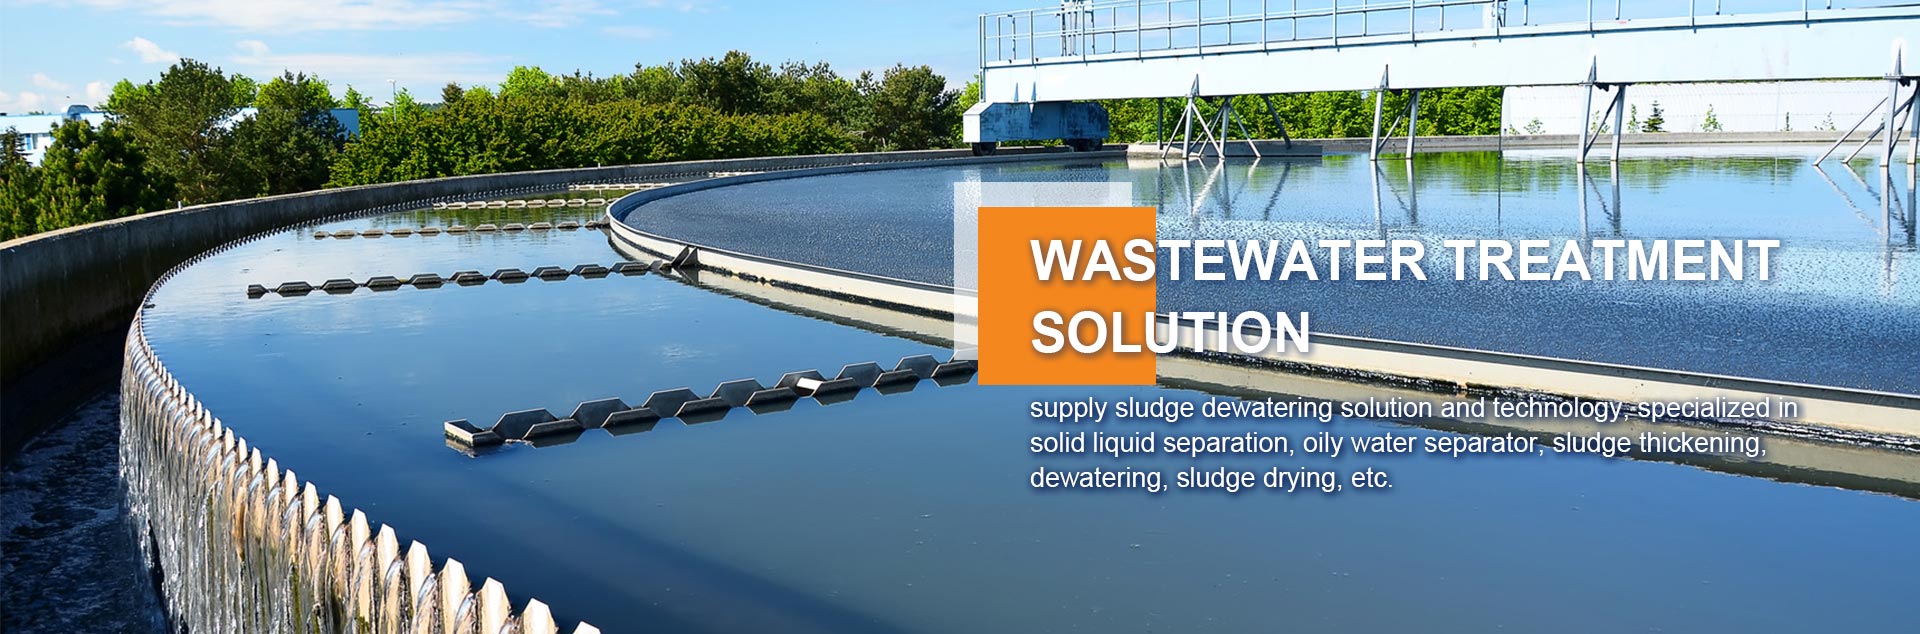 WASTEWATER TREATMENT SOLUTION